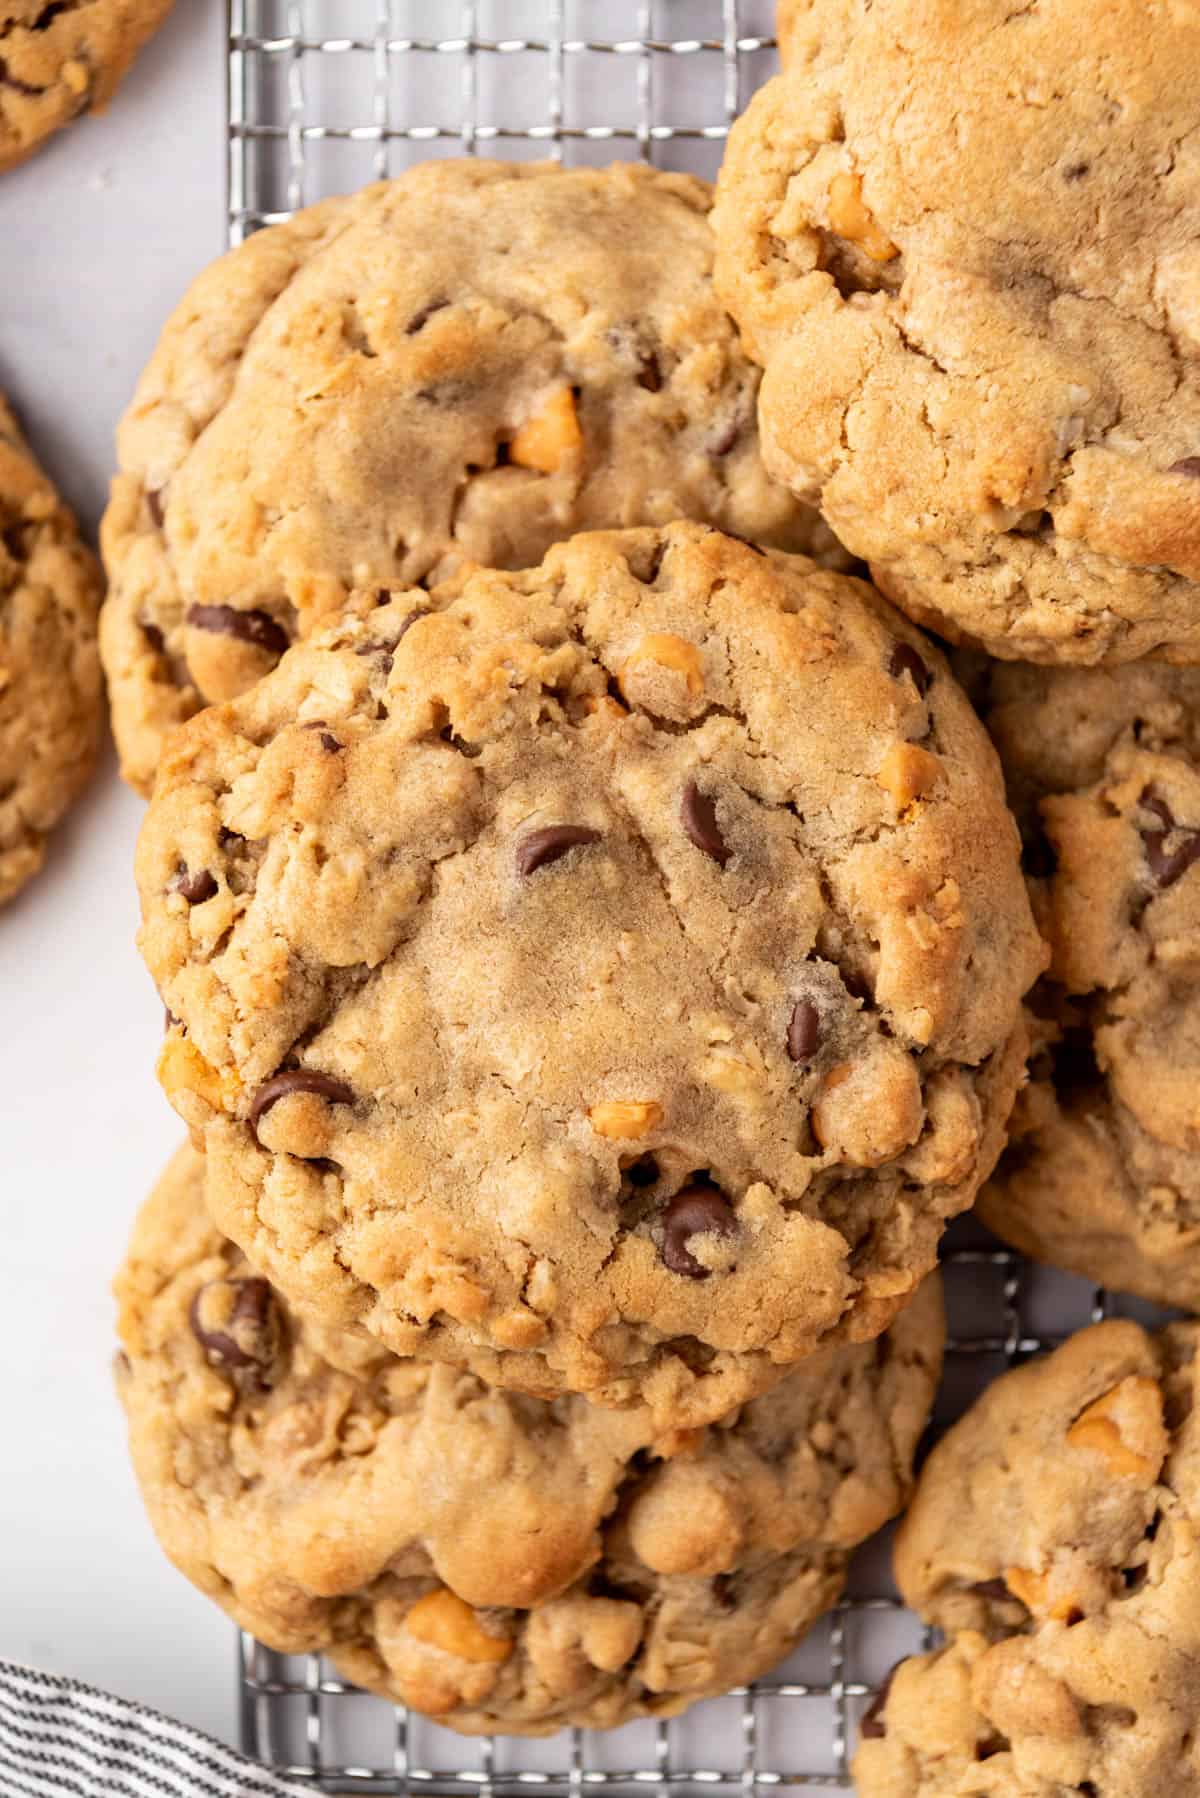 A close-up image of big, thick peanut butter oatmeal cookies with butterscotch and chocolate chips.